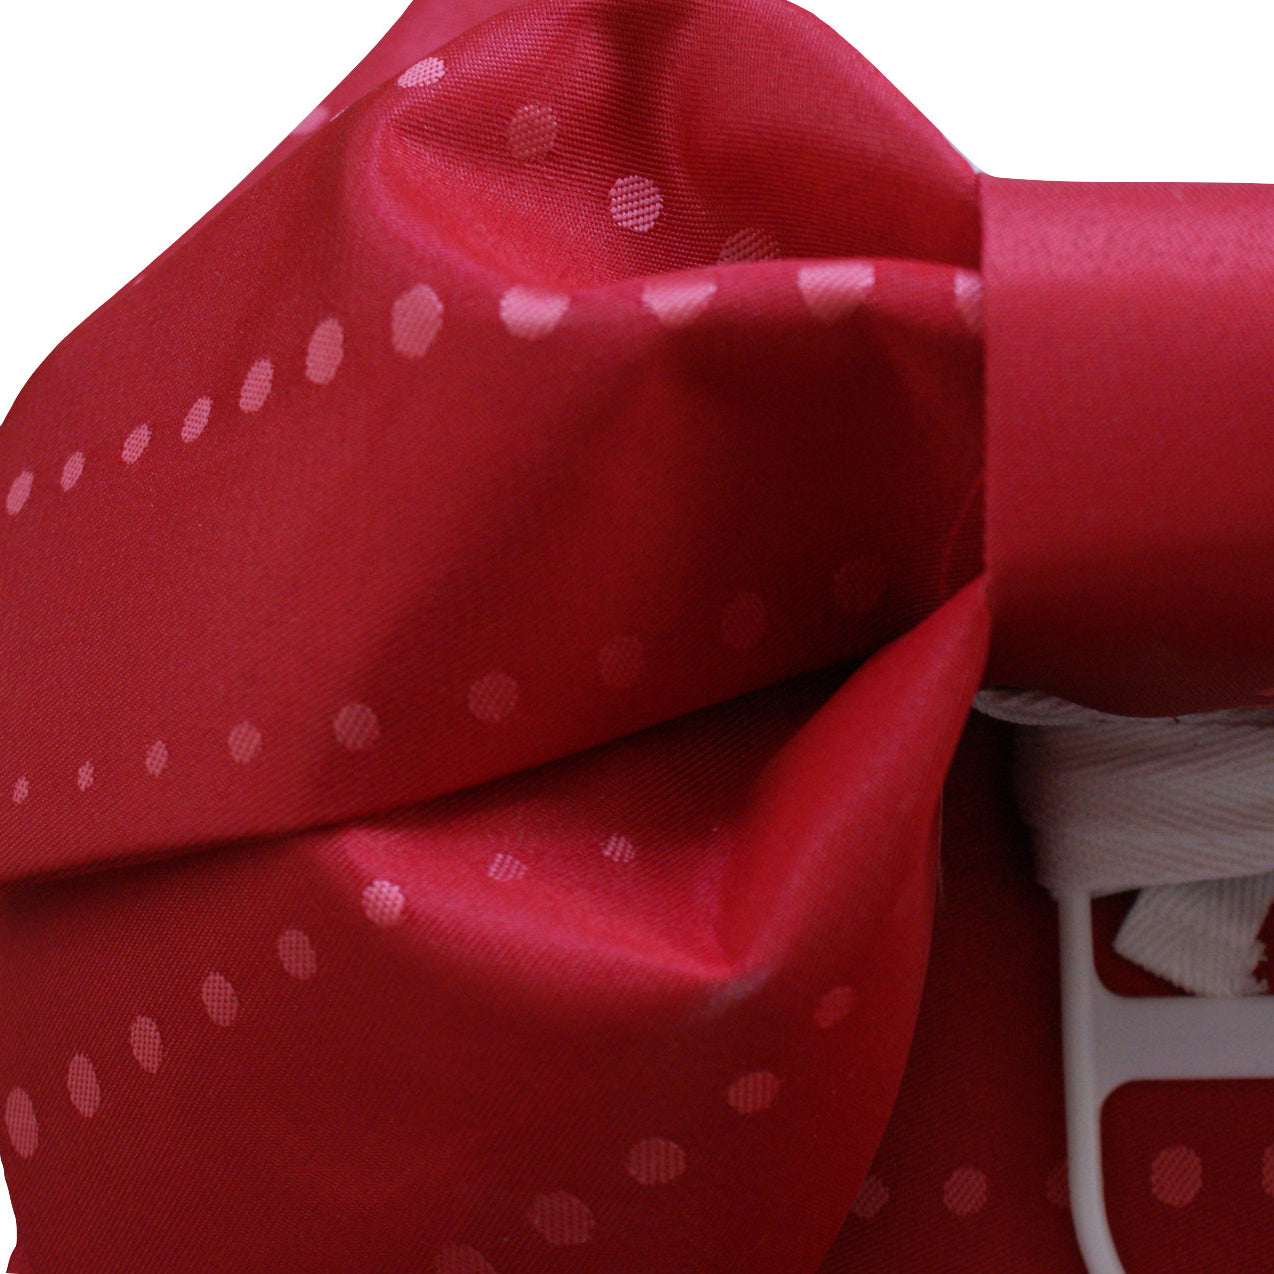 Pre-Tied Obi Belt - Dotted Red